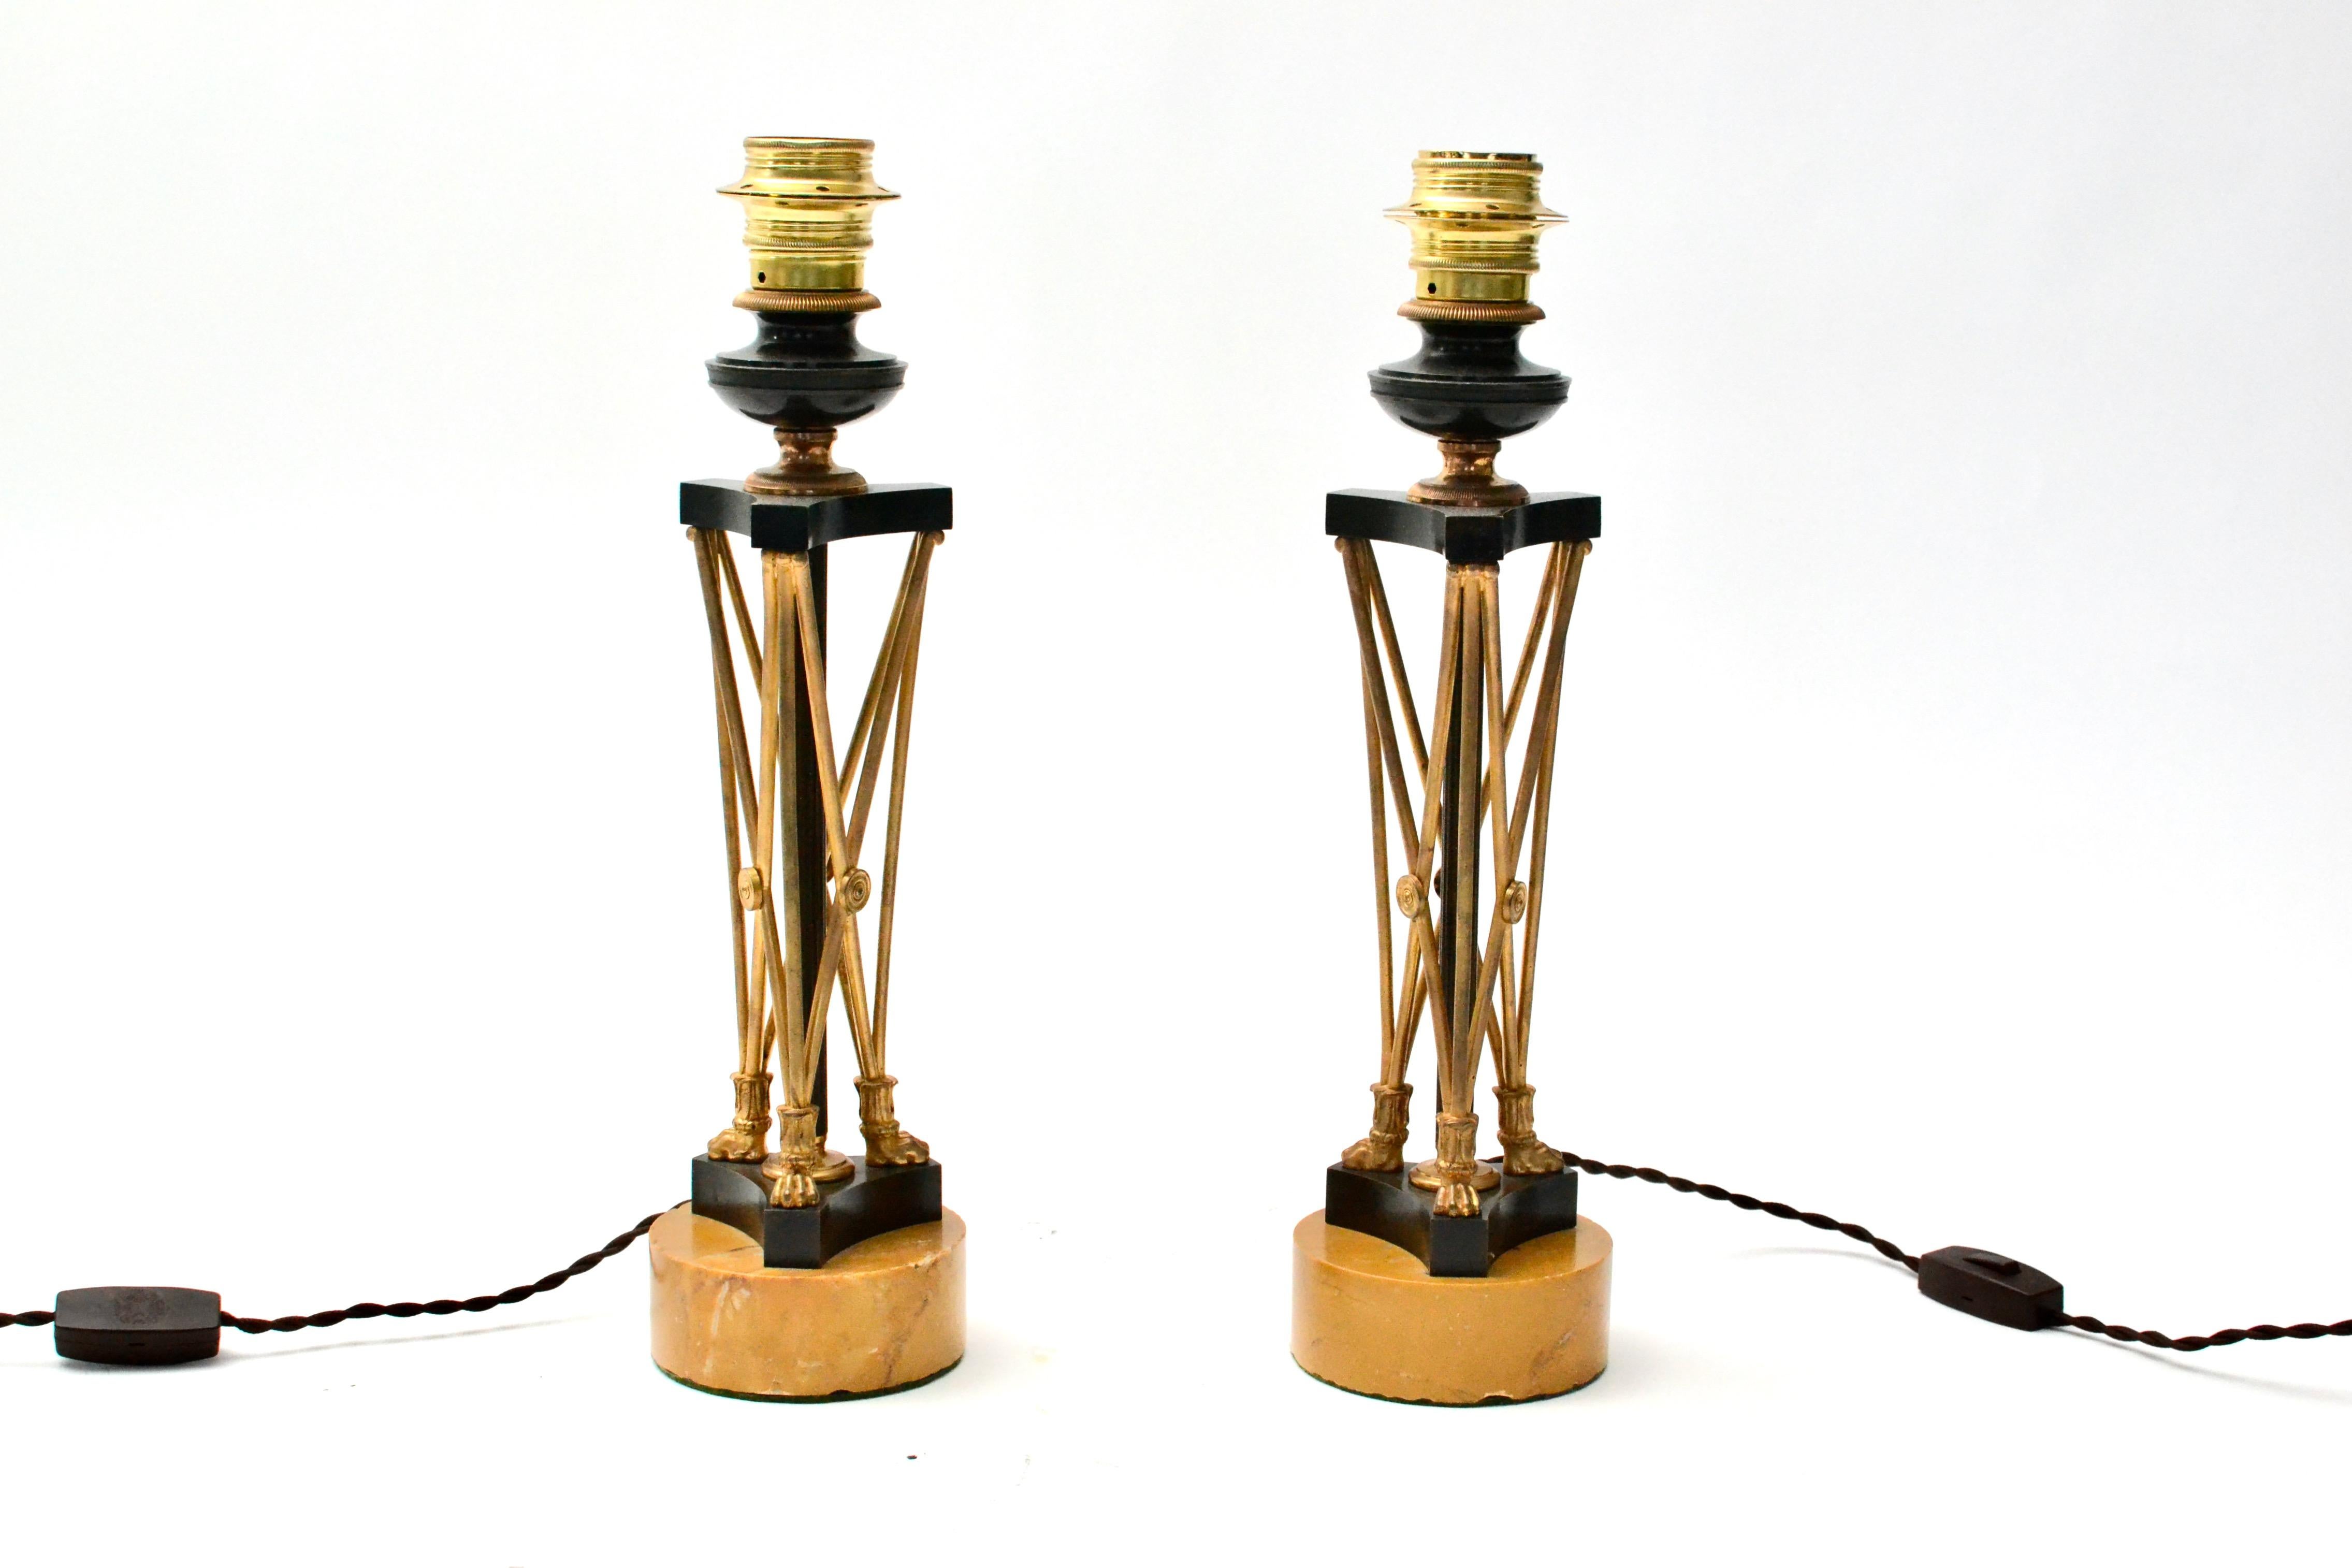 English Pair of Regency Gilt and Patinated Bronze Candlesticks, Mounted as Lamps. For Sale